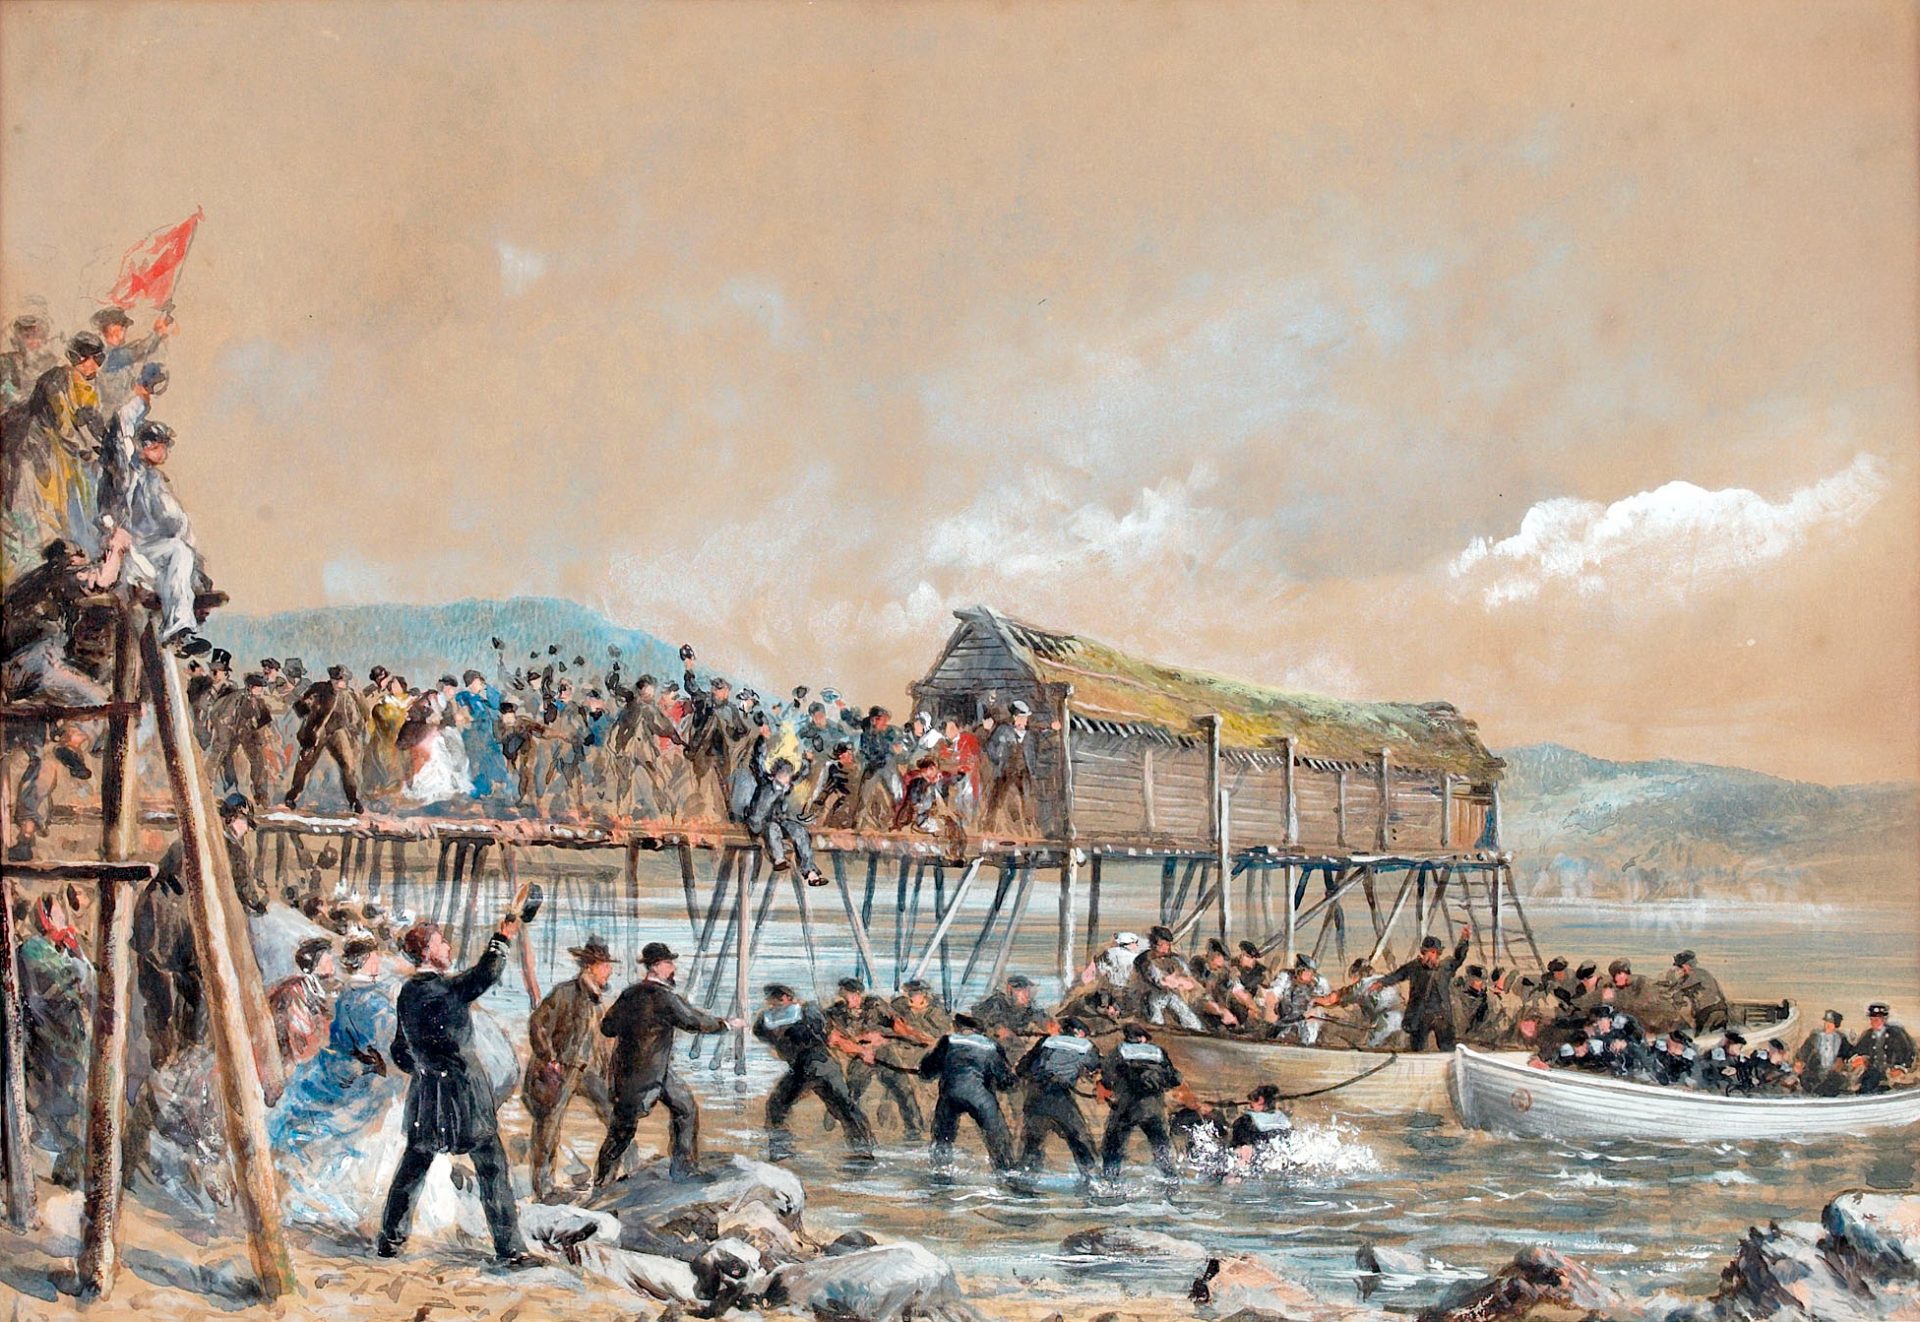 A 19th century painting of a historical event where a transatlantic telegraph cable was connected between Europe and North America. The painting shows a crowded wooden pier with people holding a red flag, a boat carrying the cable, and a mountainous landscape in the background.